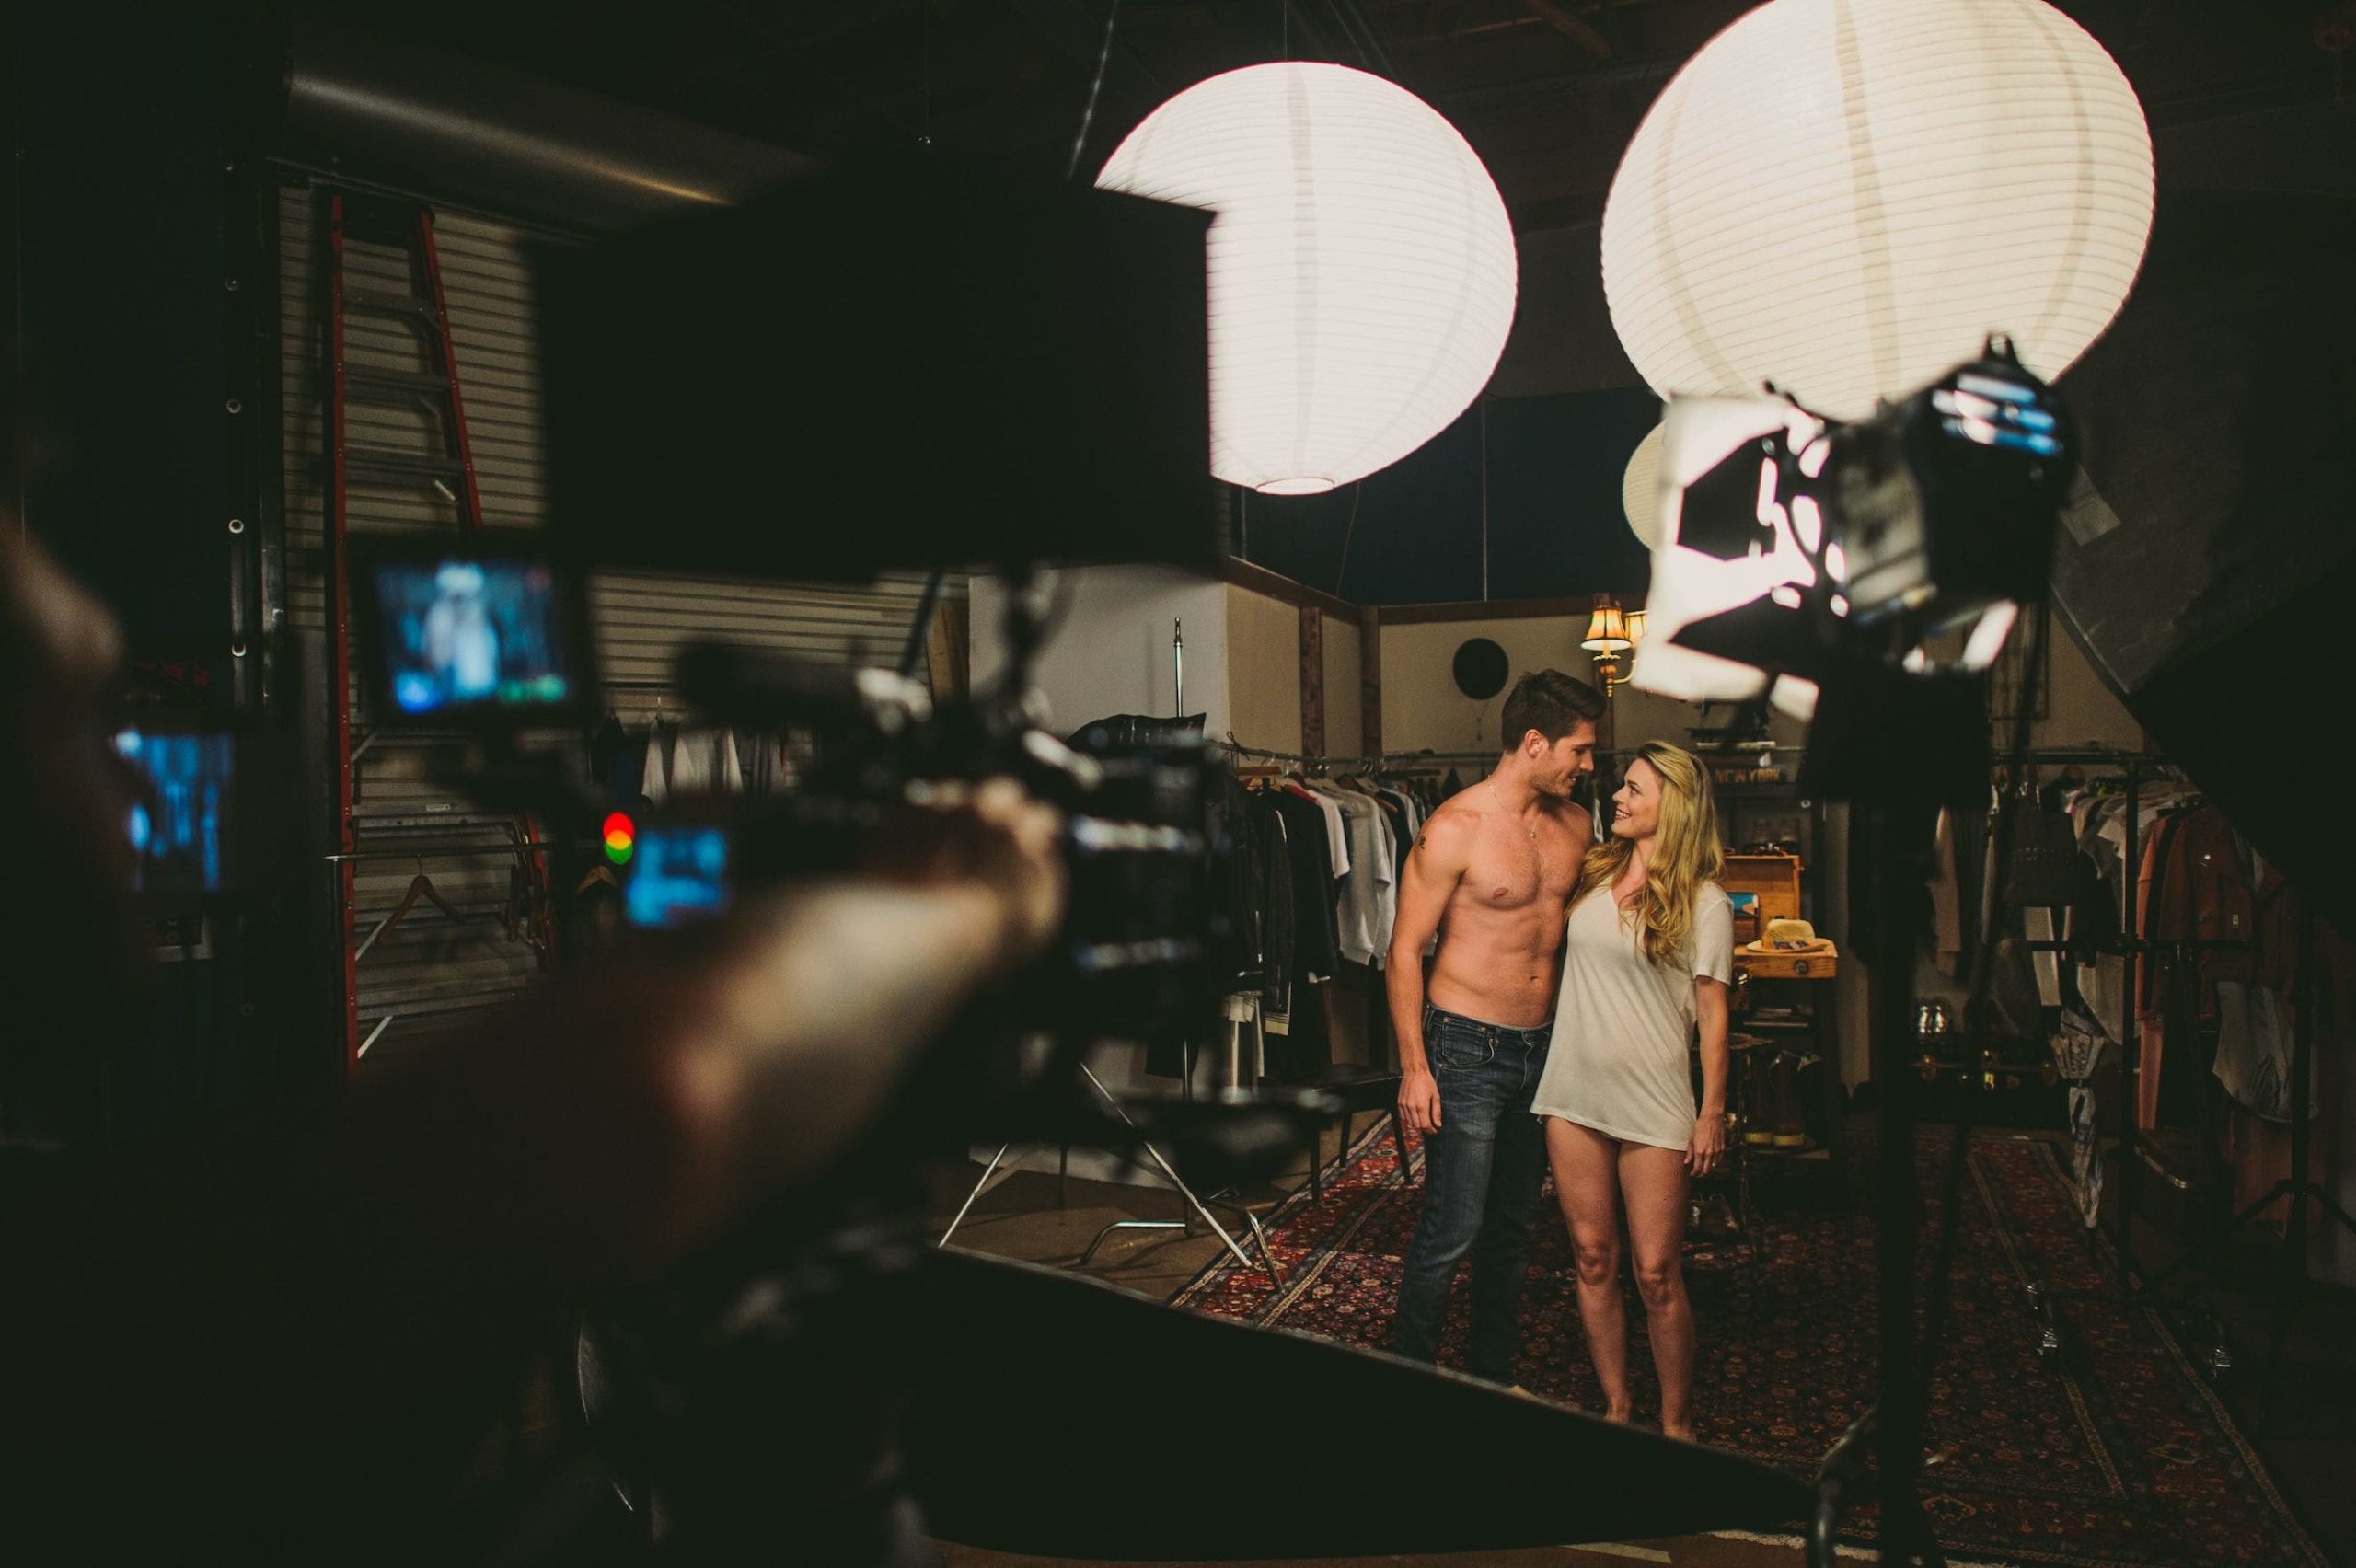 AllSaints Clothing brand Behind the scenes look at a shirtless man with a woman wearing a long gray t shirt being filmed by videographer in a studio